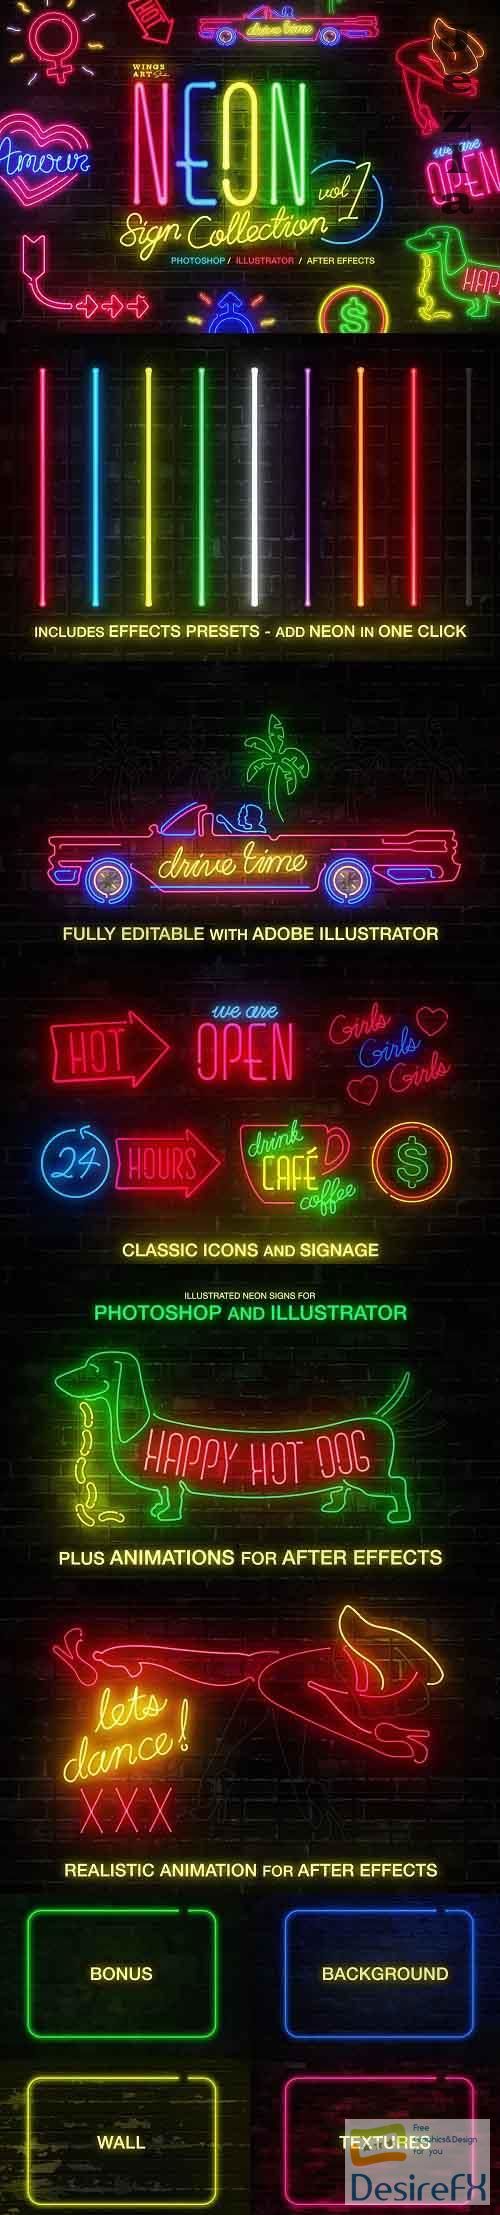 CreativeMarket - Neon Sign Collection: Volume One 4718662